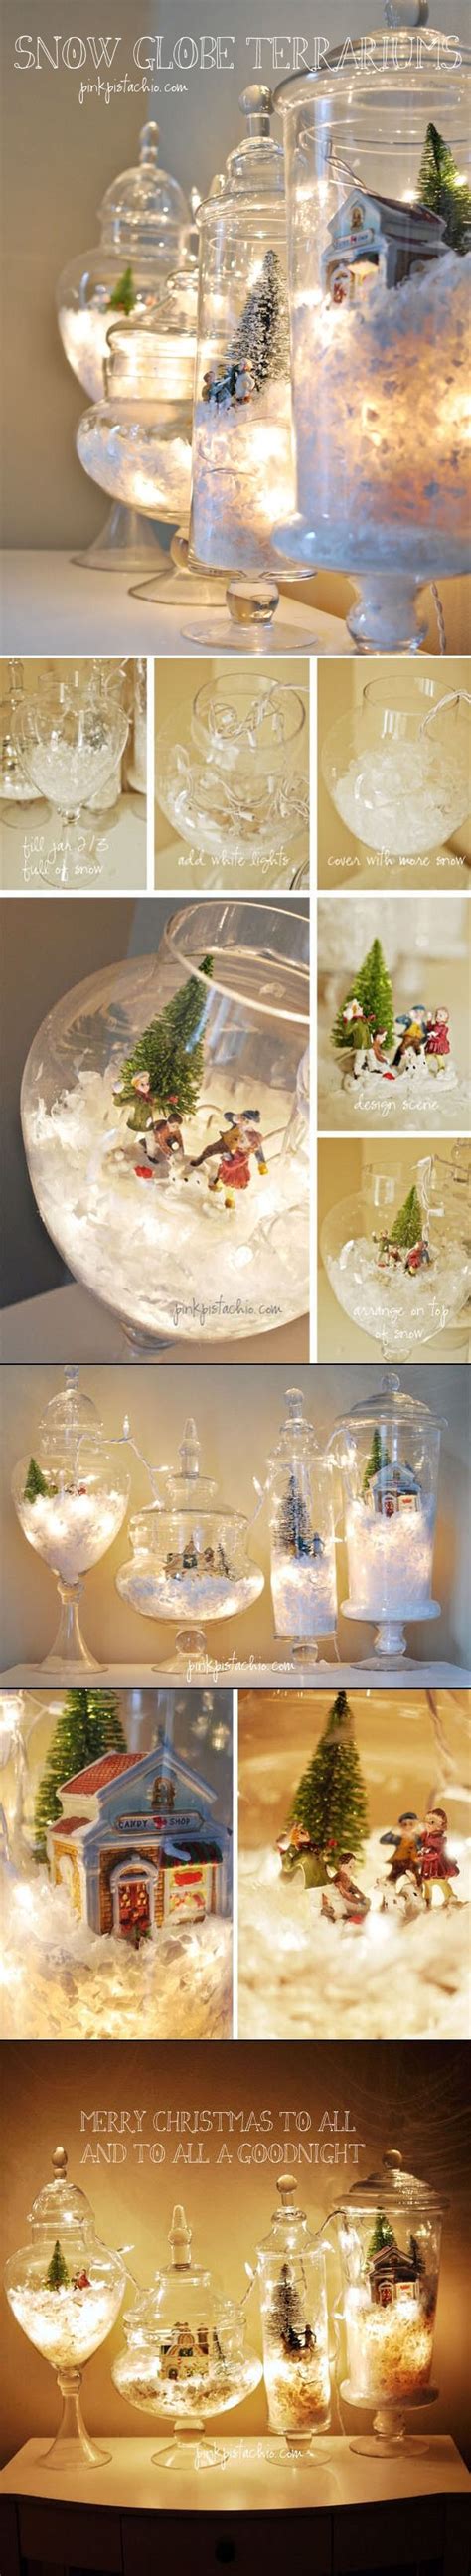 Diy Snow Globe Terrariums Pictures Photos And Images For Facebook